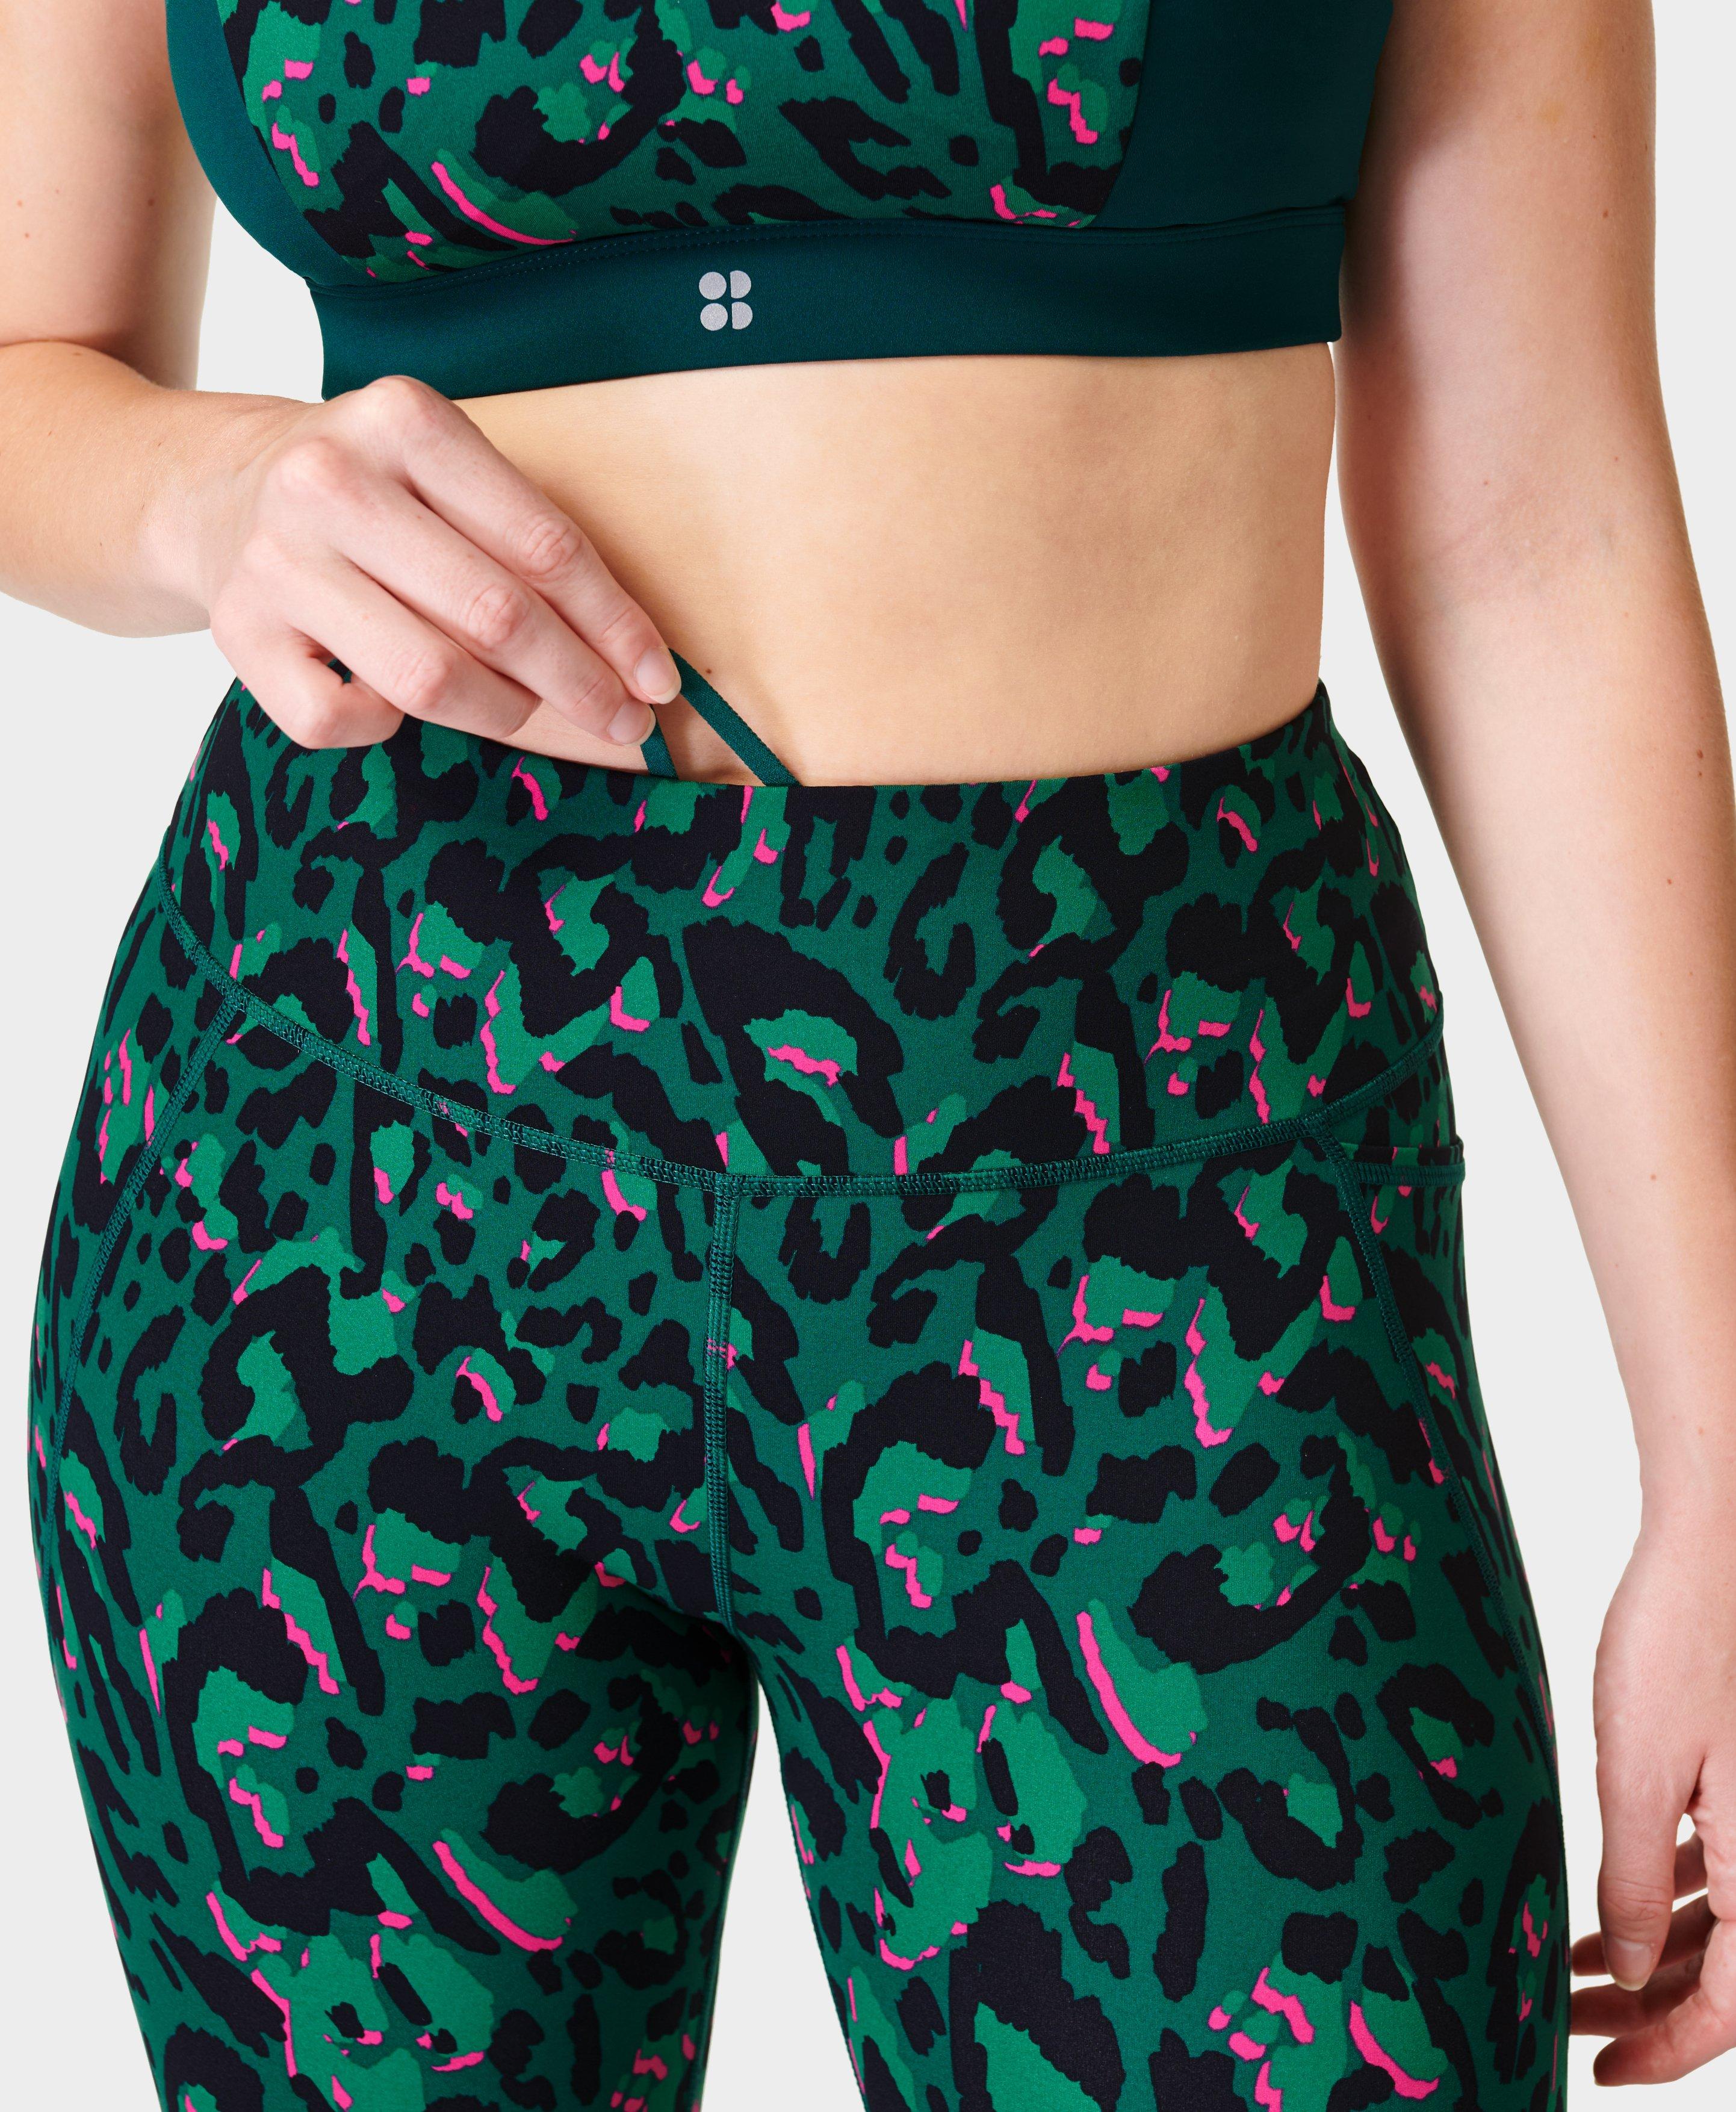 Tom Tiger Leggings Green Size L - $12 (55% Off Retail) - From Raven